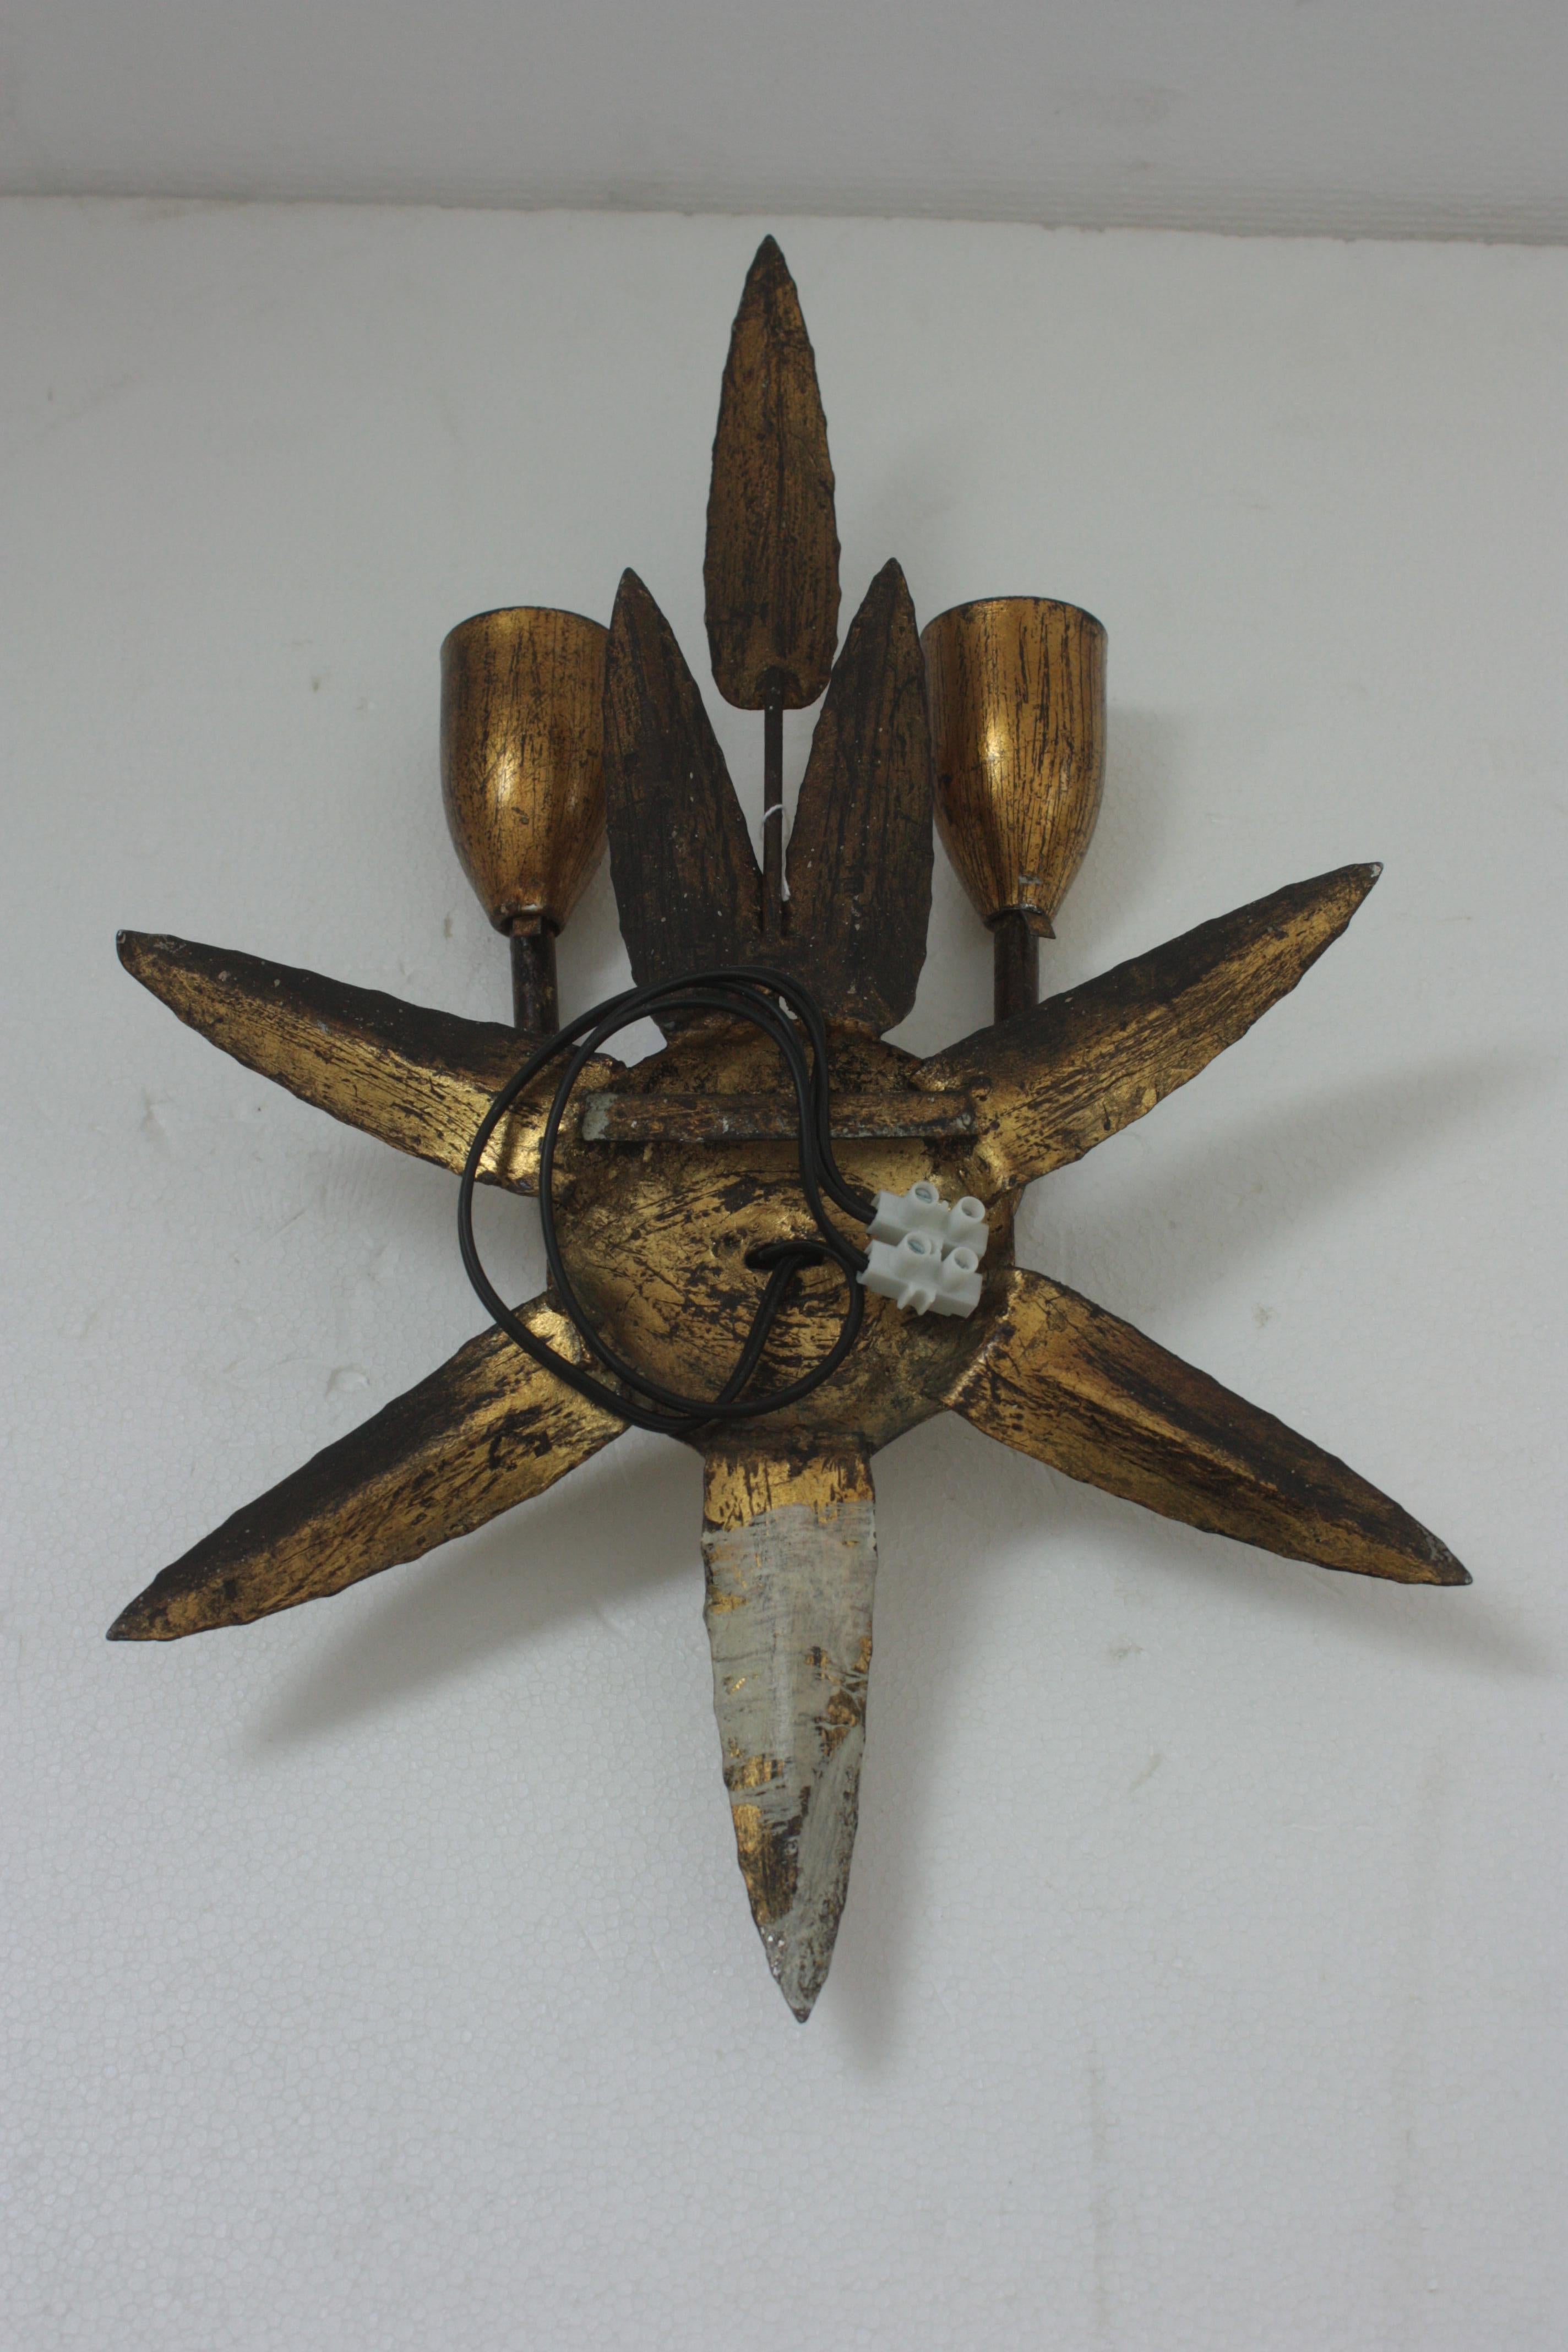 Spanish Gilt Iron Wall Sconce with Foliage Design and Starburst Backplate, 1950s For Sale 6